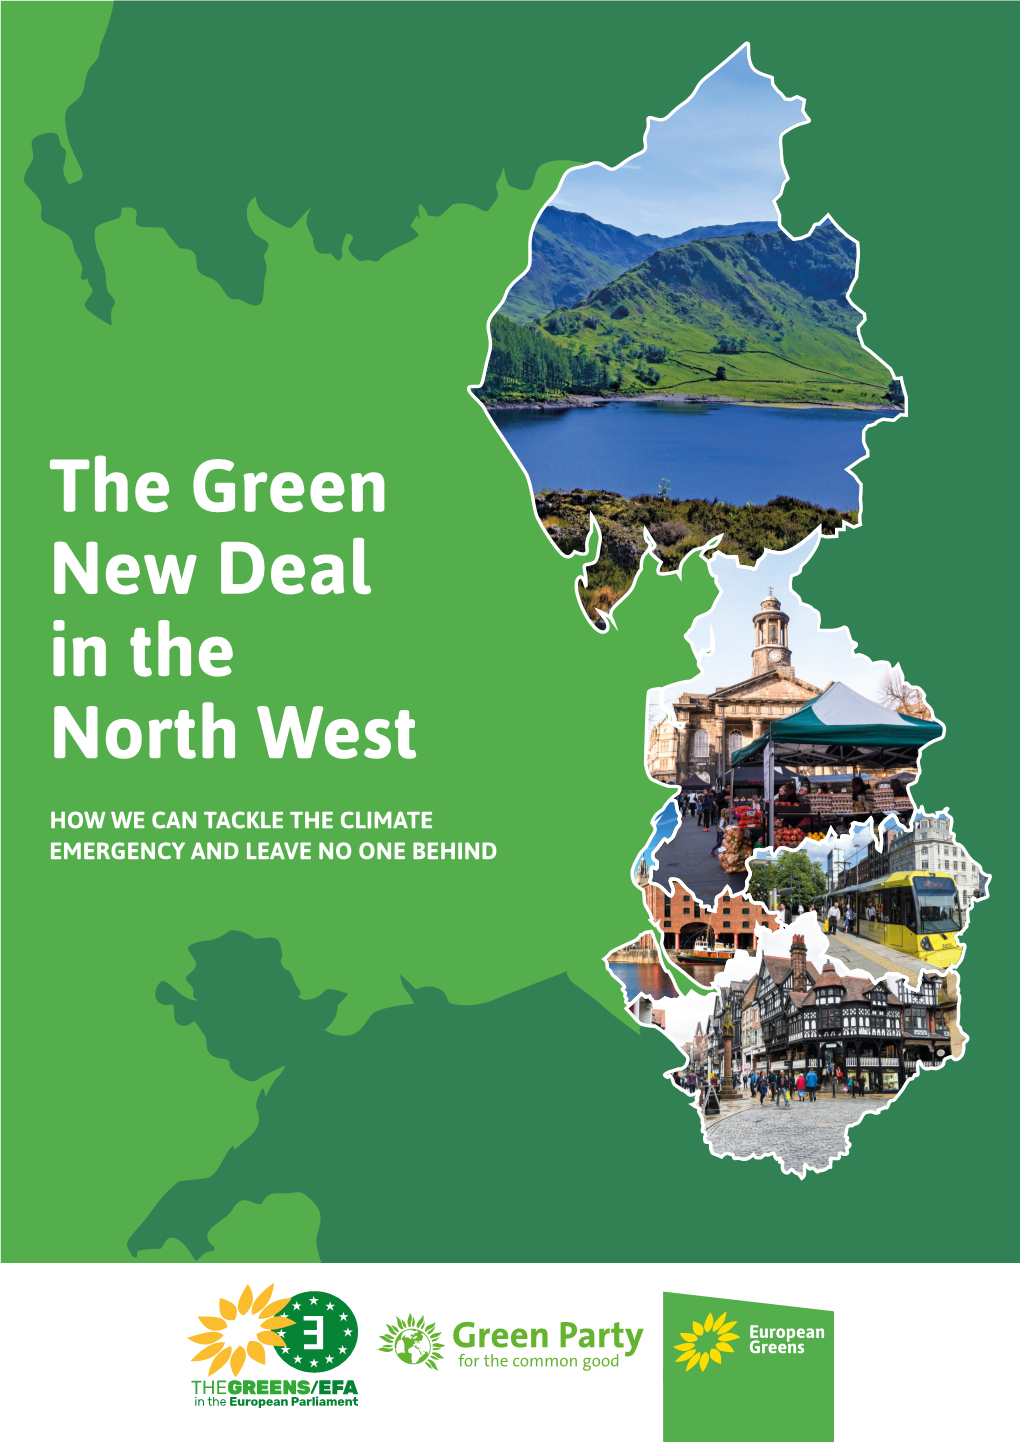 The Green New Deal in the North West HOW WE CAN TACKLE the CLIMATE EMERGENCY and LEAVE NO ONE BEHIND “I Strike Because We Need to Make People Listen